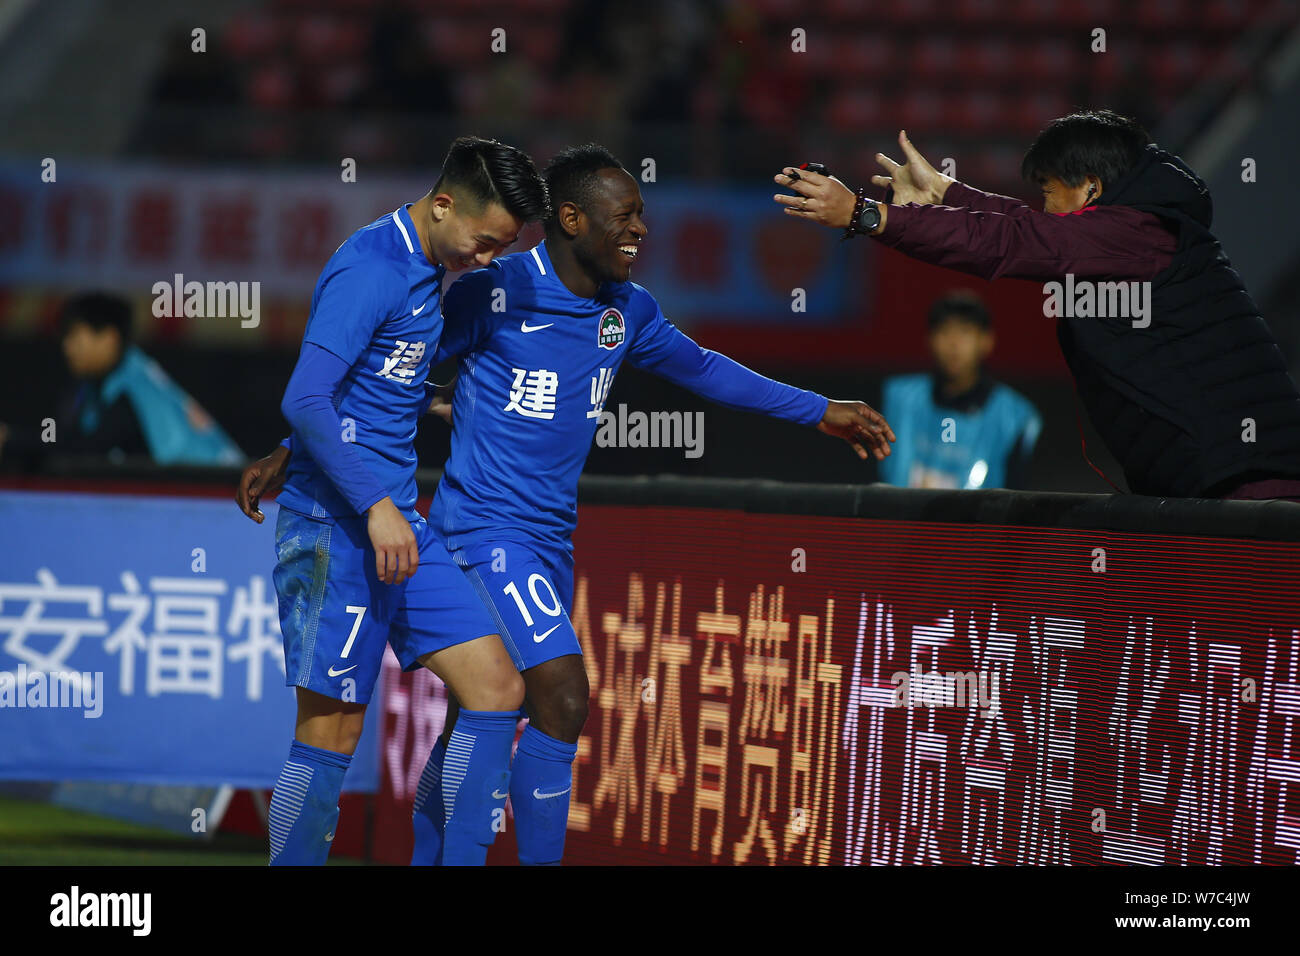 Cameroonian football player Christian Bassogog of Henan Jianye, center, celebrates with his teammate Hu Jinghang and their coach Guo Guangqi after sco Stock Photo